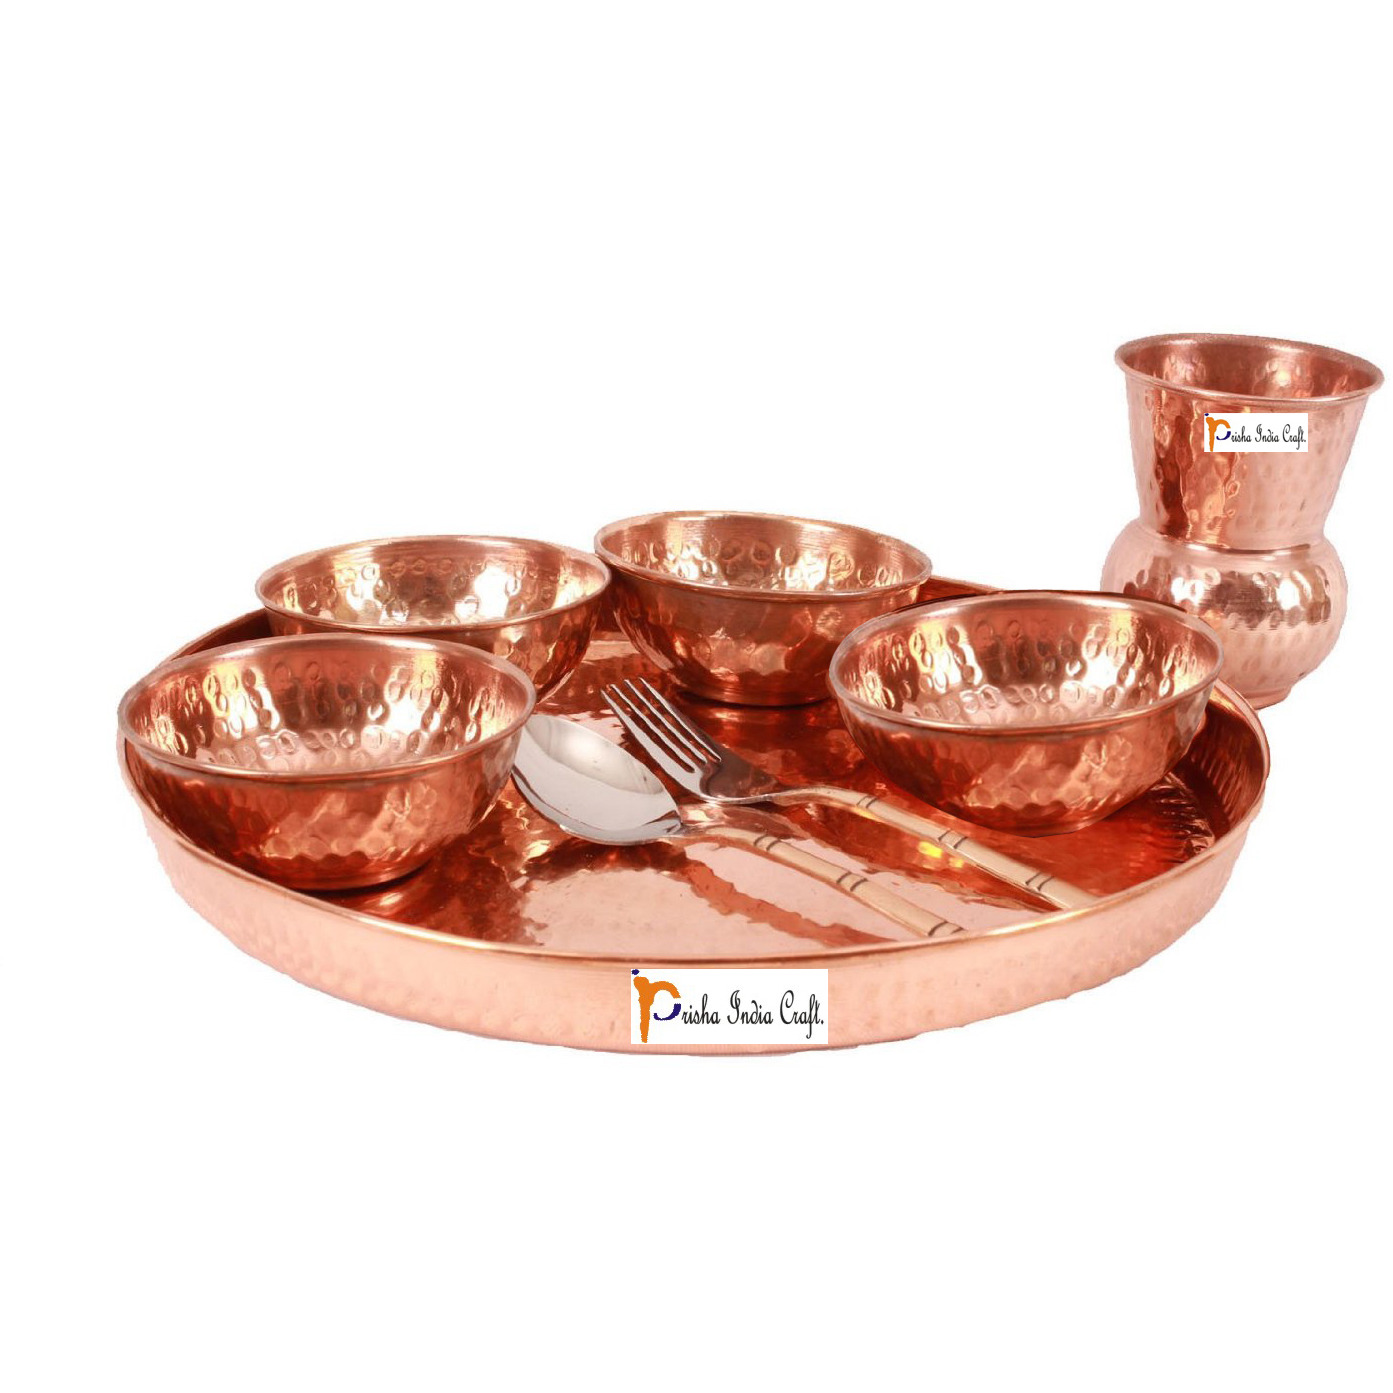 Prisha India Craft B. Set of 6 Dinnerware Traditional 100% Pure Copper Dinner Set of Thali Plate, Bowls, Glass and Spoon, Dia 12  With 1 Pure Copper Hammered Pitcher Jug - Christmas Gift